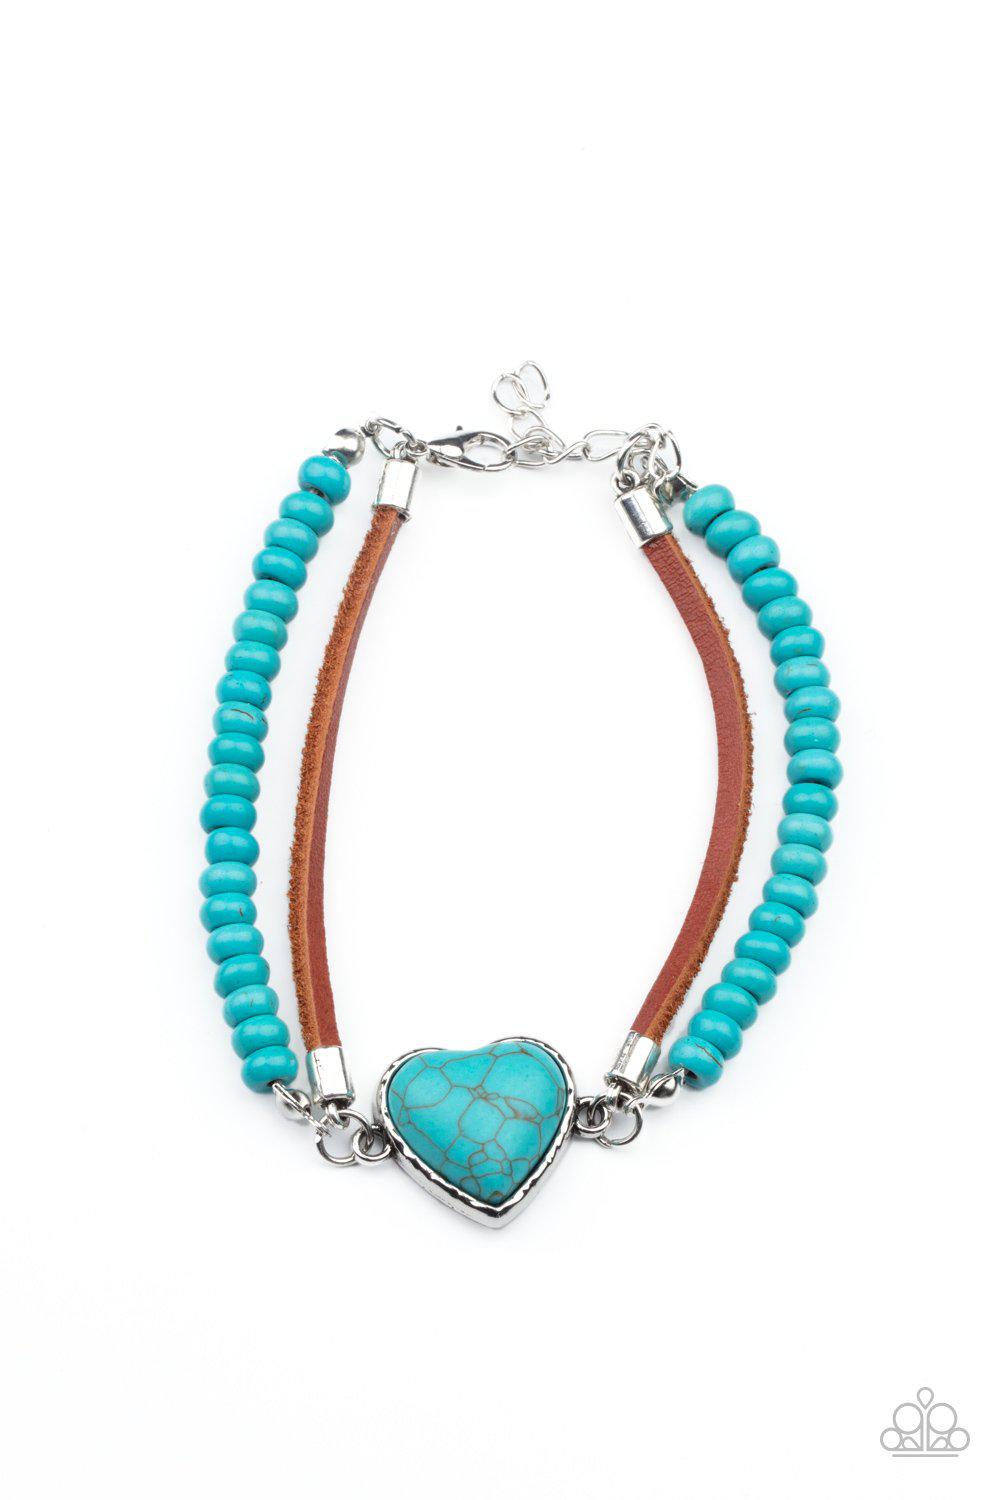 Charmingly Country Turquoise Blue Stone Heart Bracelet - Paparazzi Accessories- lightbox - CarasShop.com - $5 Jewelry by Cara Jewels